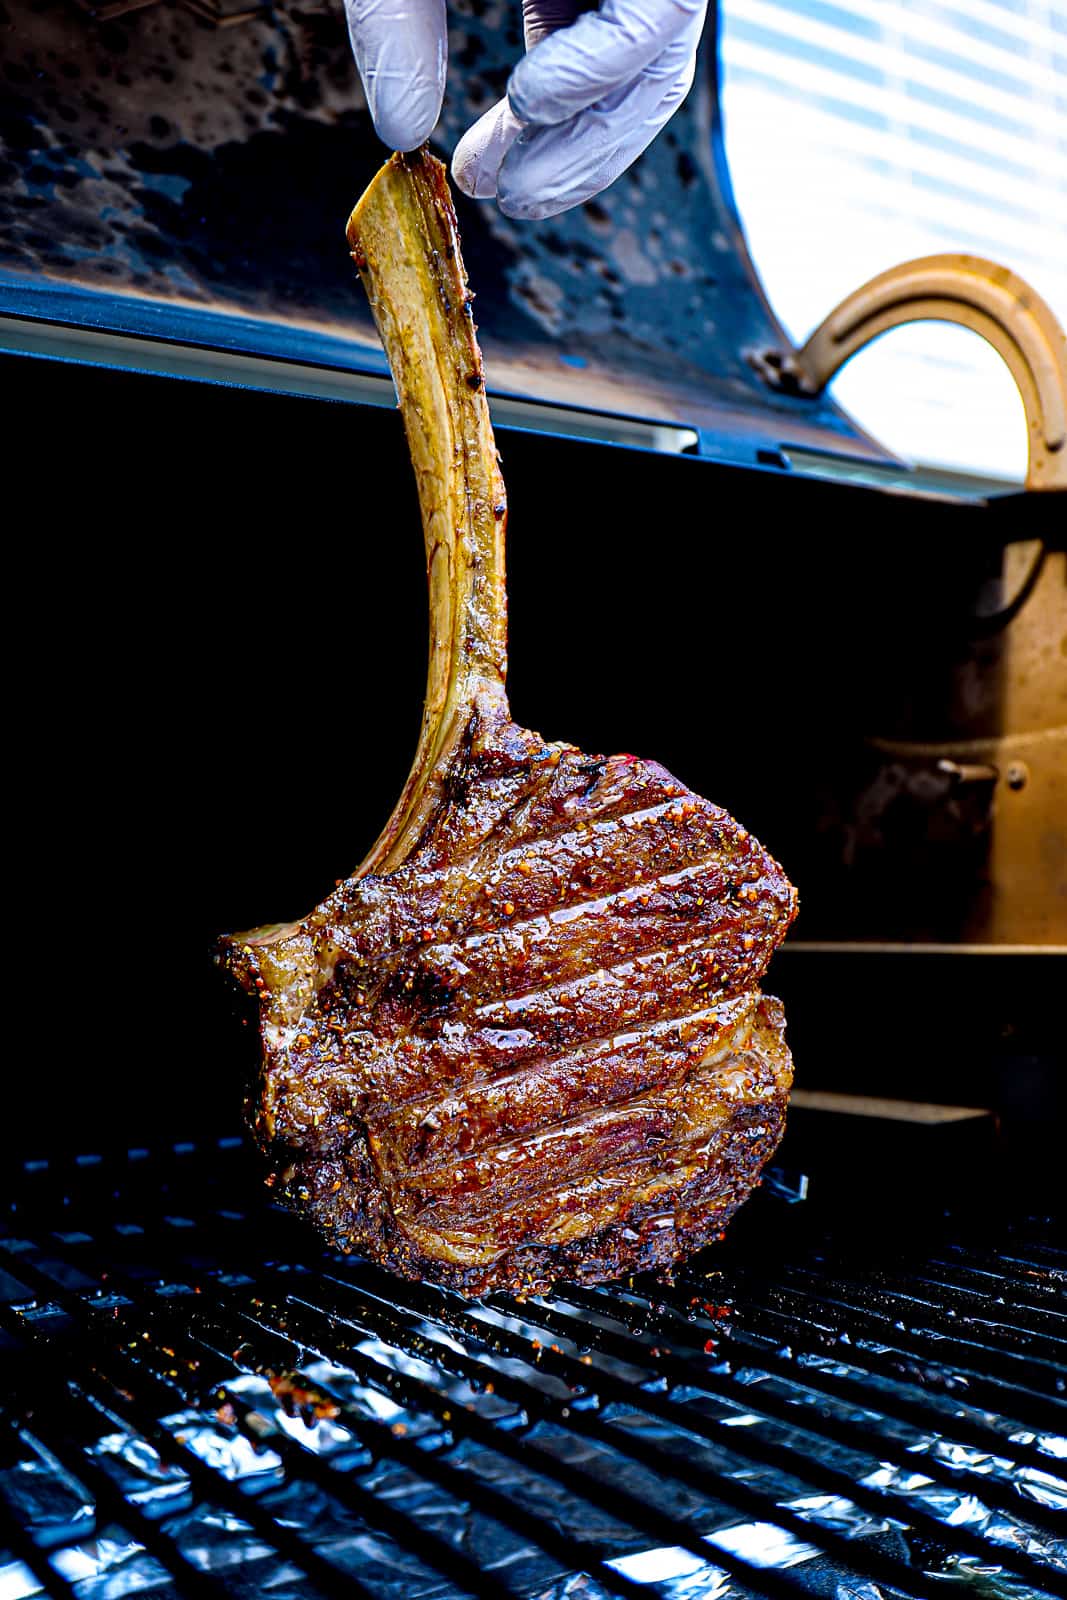 Best Traeger Recipes For Steak Example with tomahawk